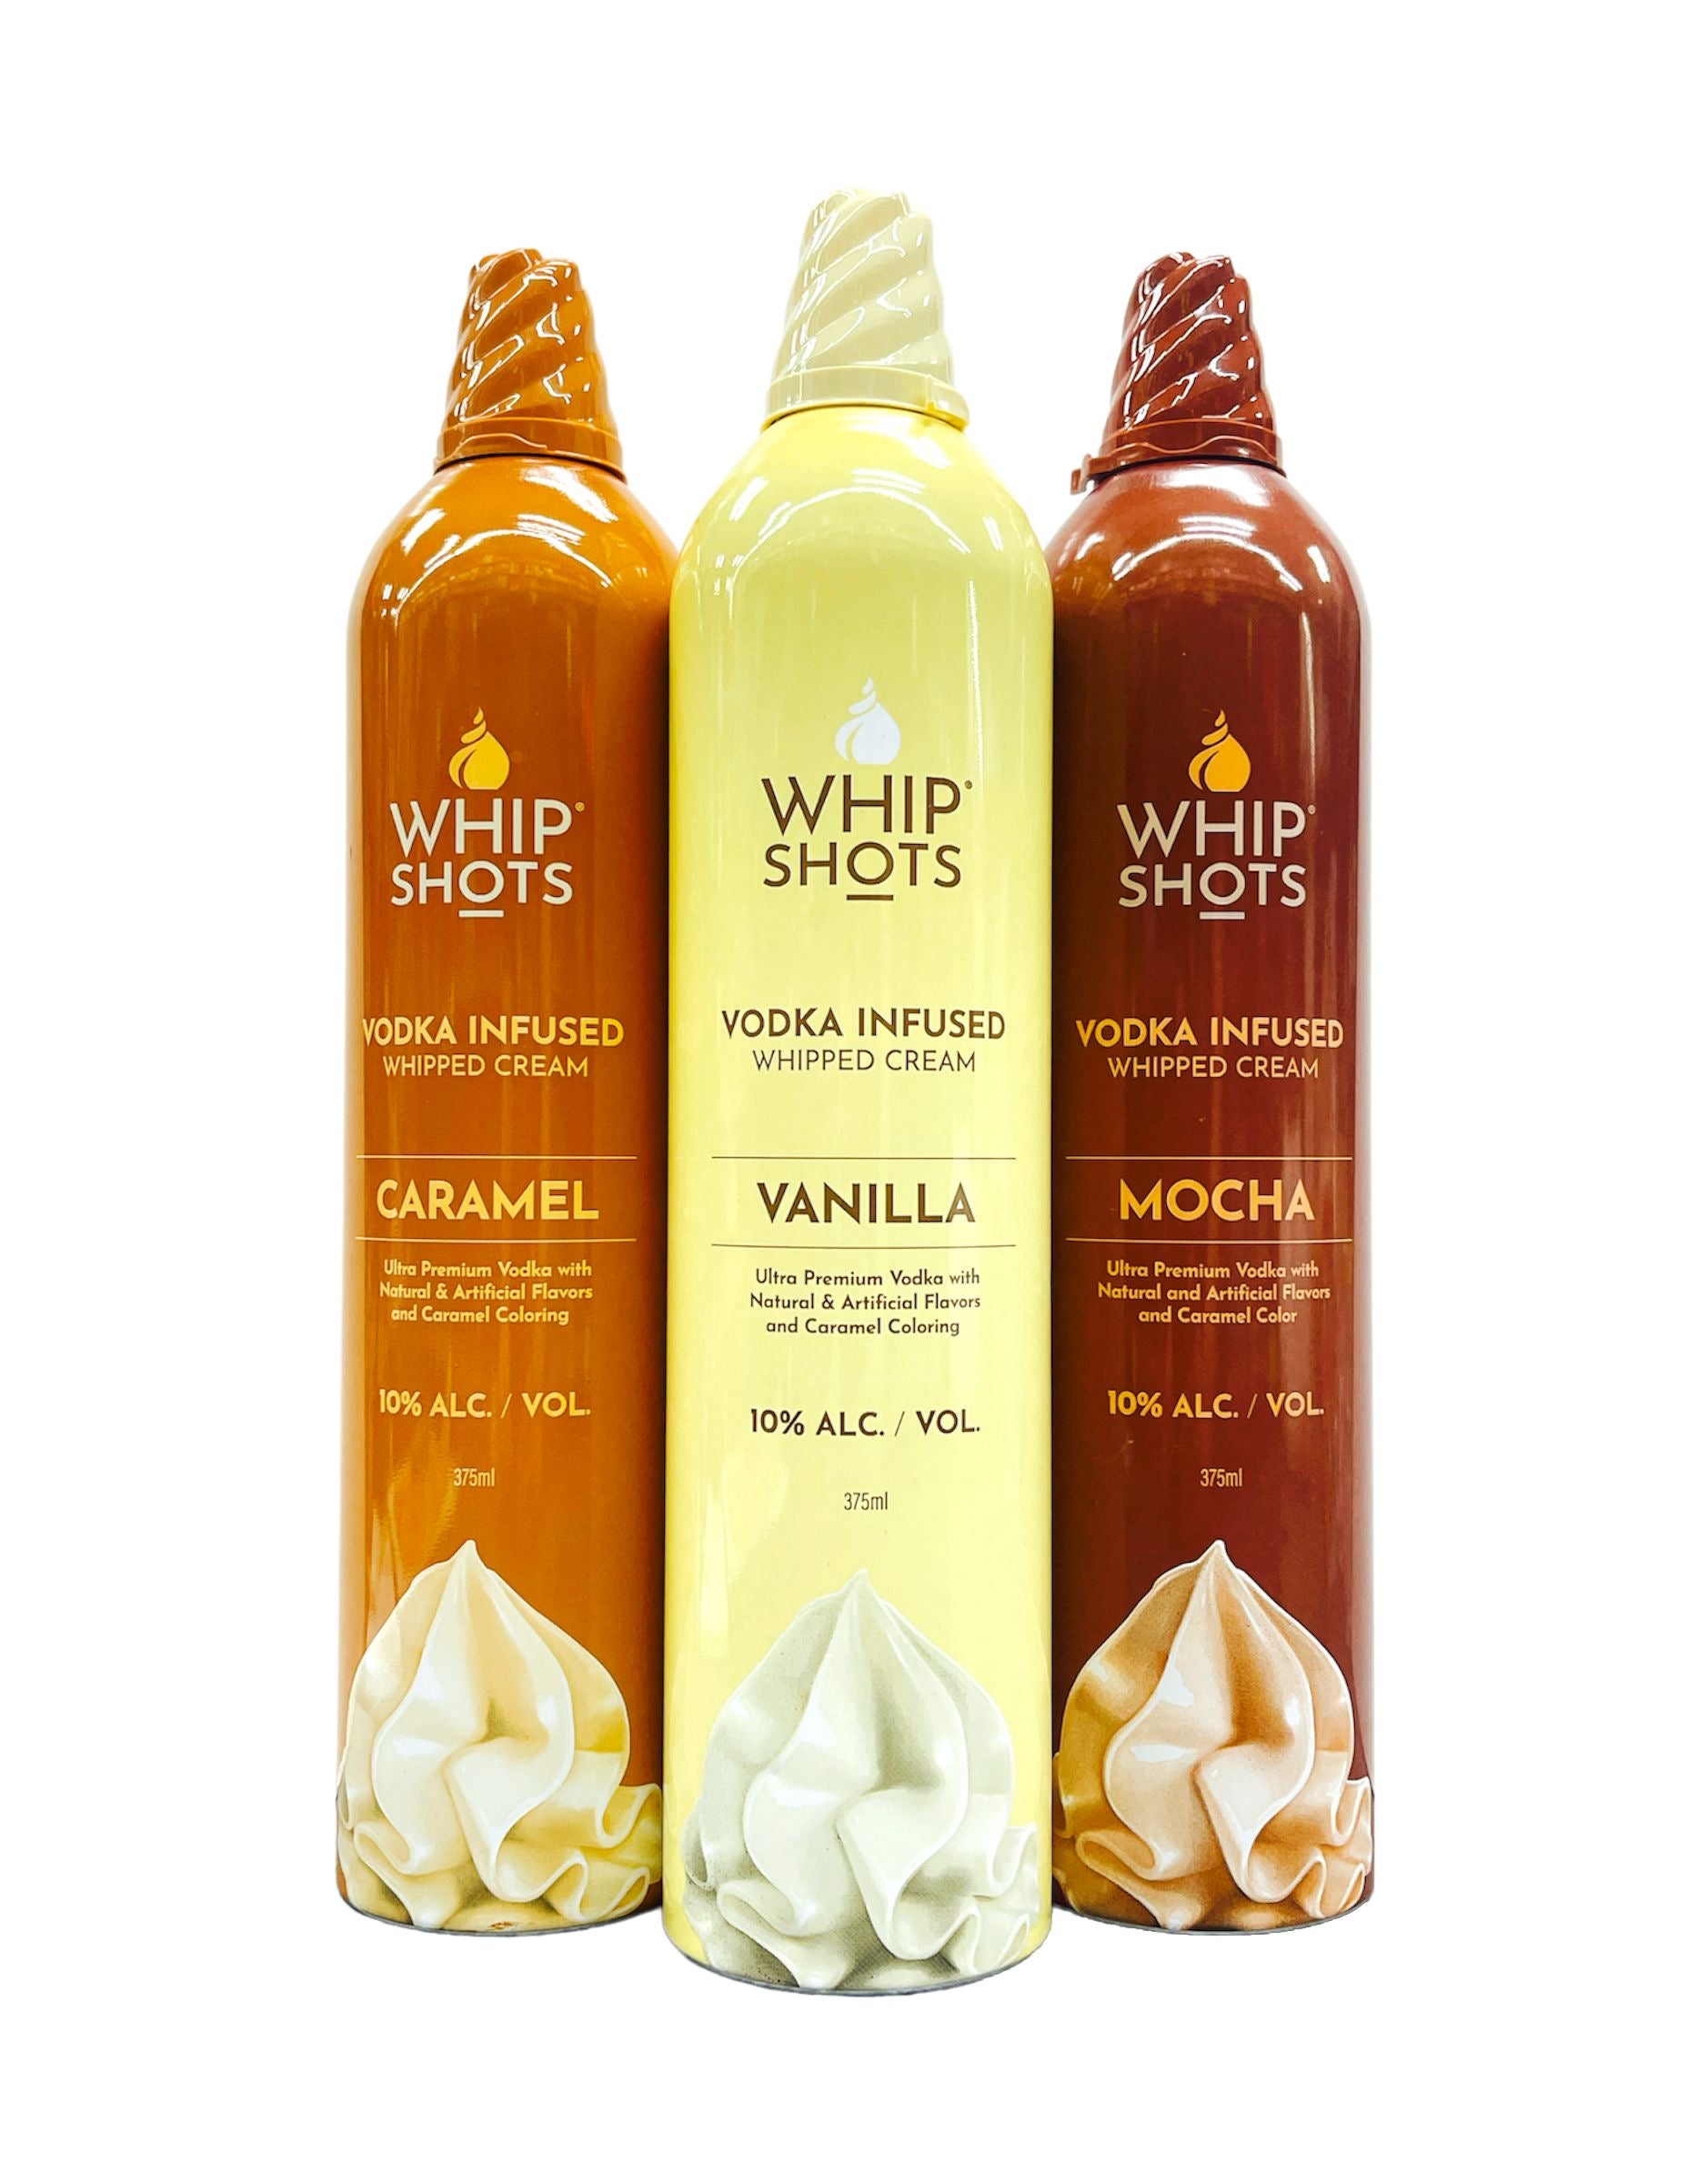 Whip Shots Vodka Infused Whipped Cream Bundle (375ML)